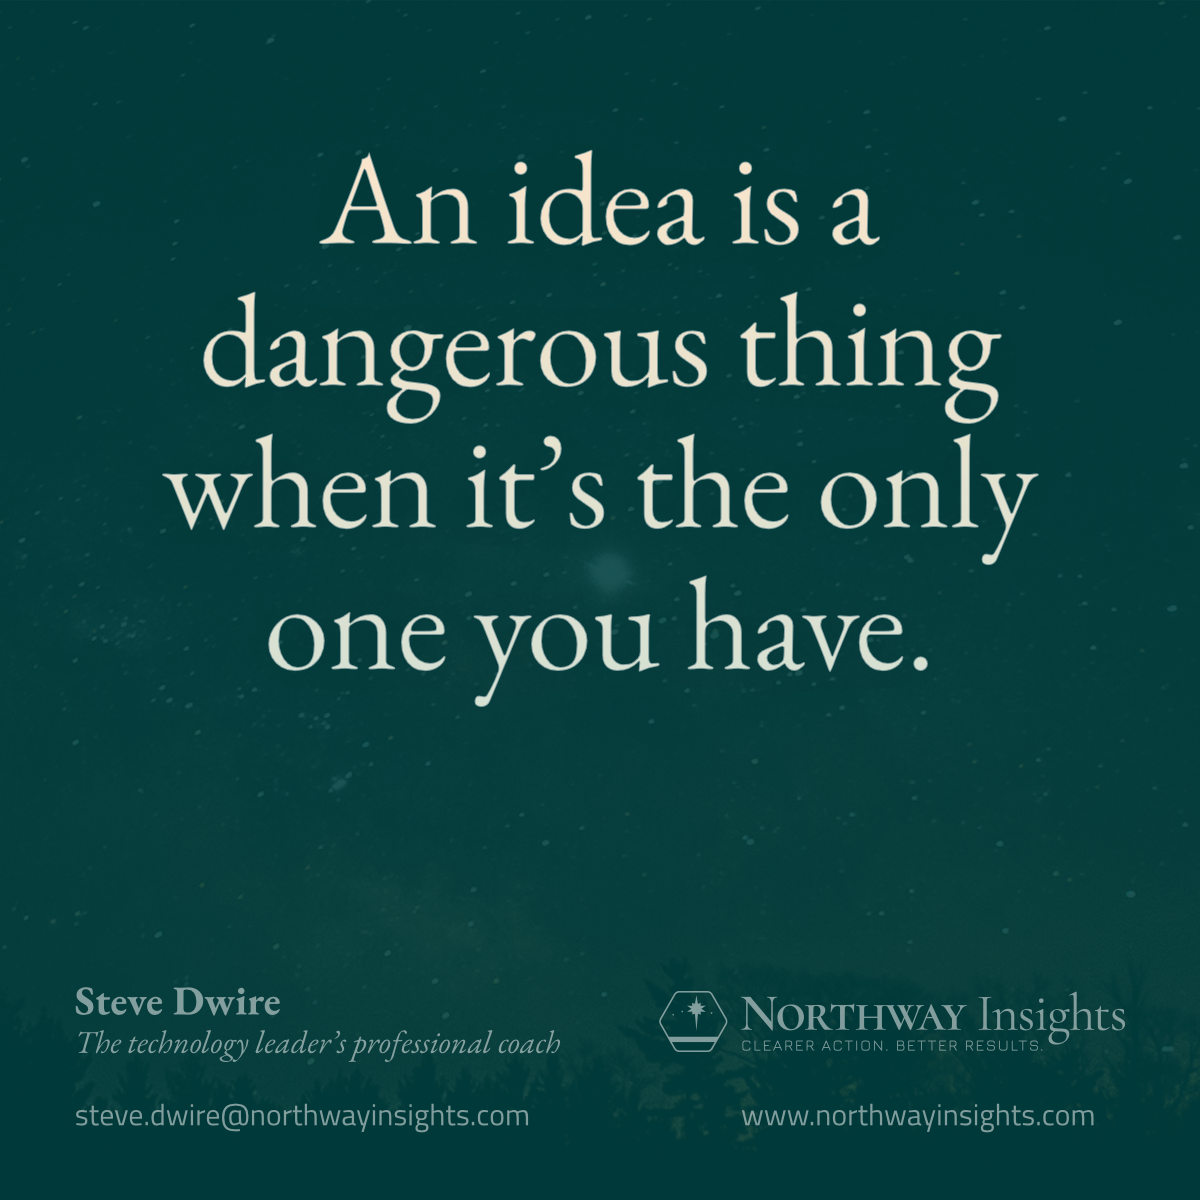 An idea is a dangerous thing when it's the only one you have.